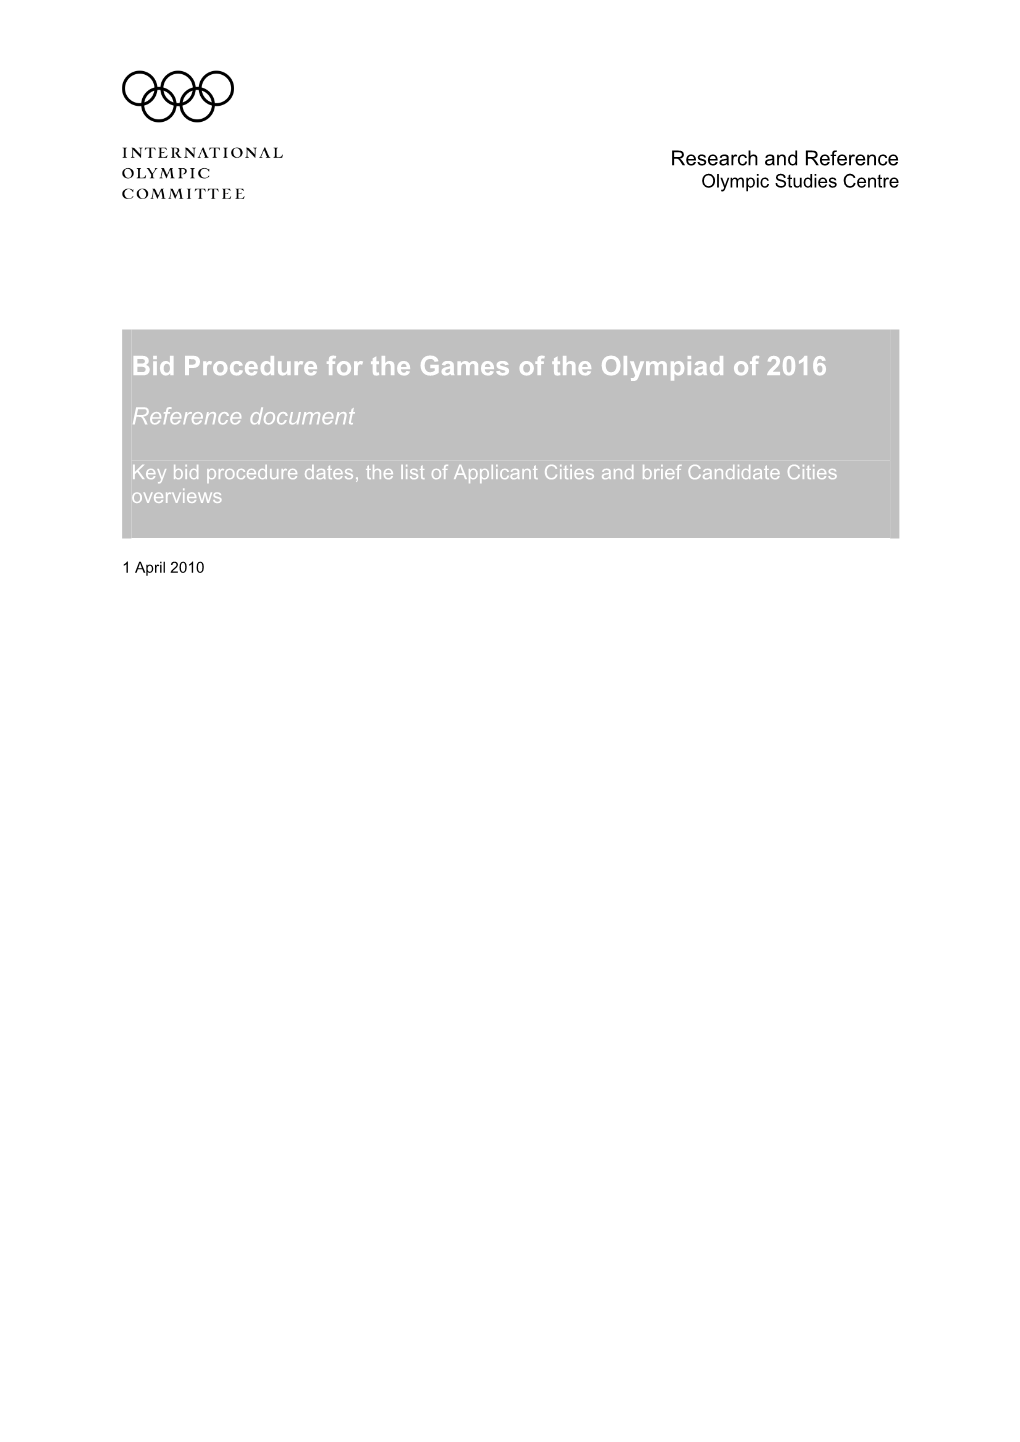 Bid Procedure for the Games of the Olympiad of 2016